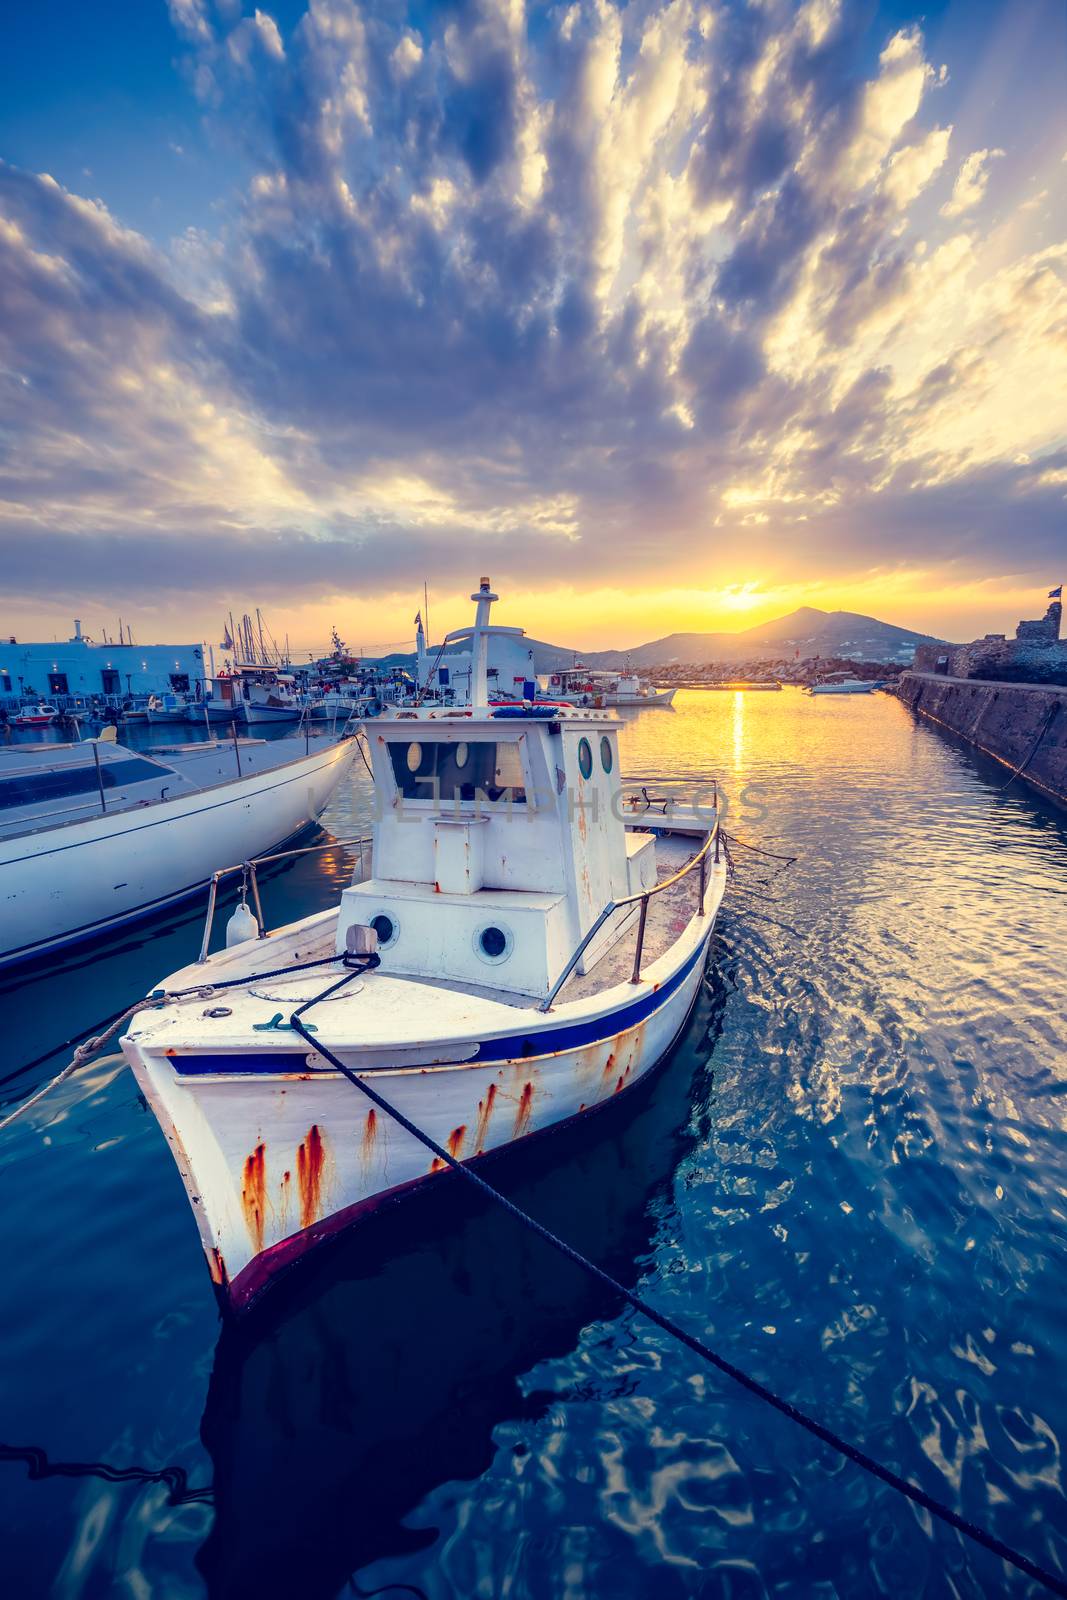 Fishing boat in port of Naousa on sunset. Paros lsland, Greece by dimol